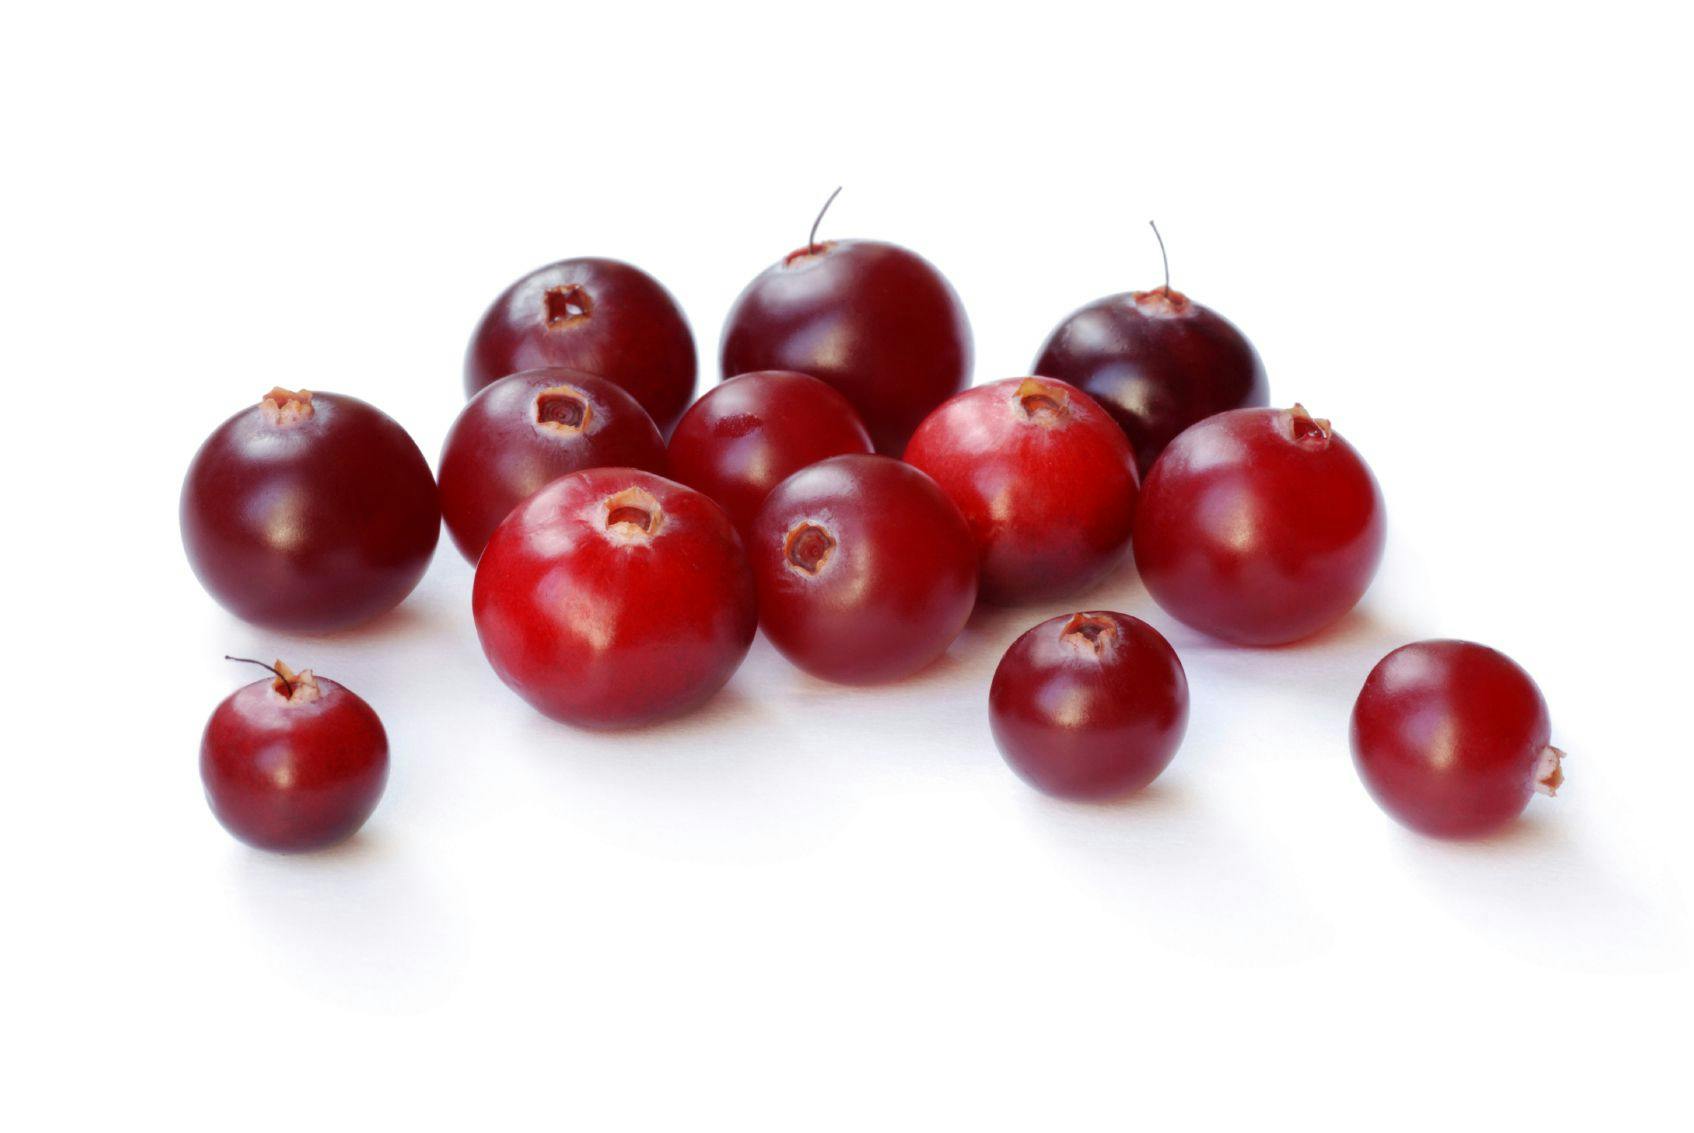 Cranberry Seed Oil Ingredient for Skin Health?